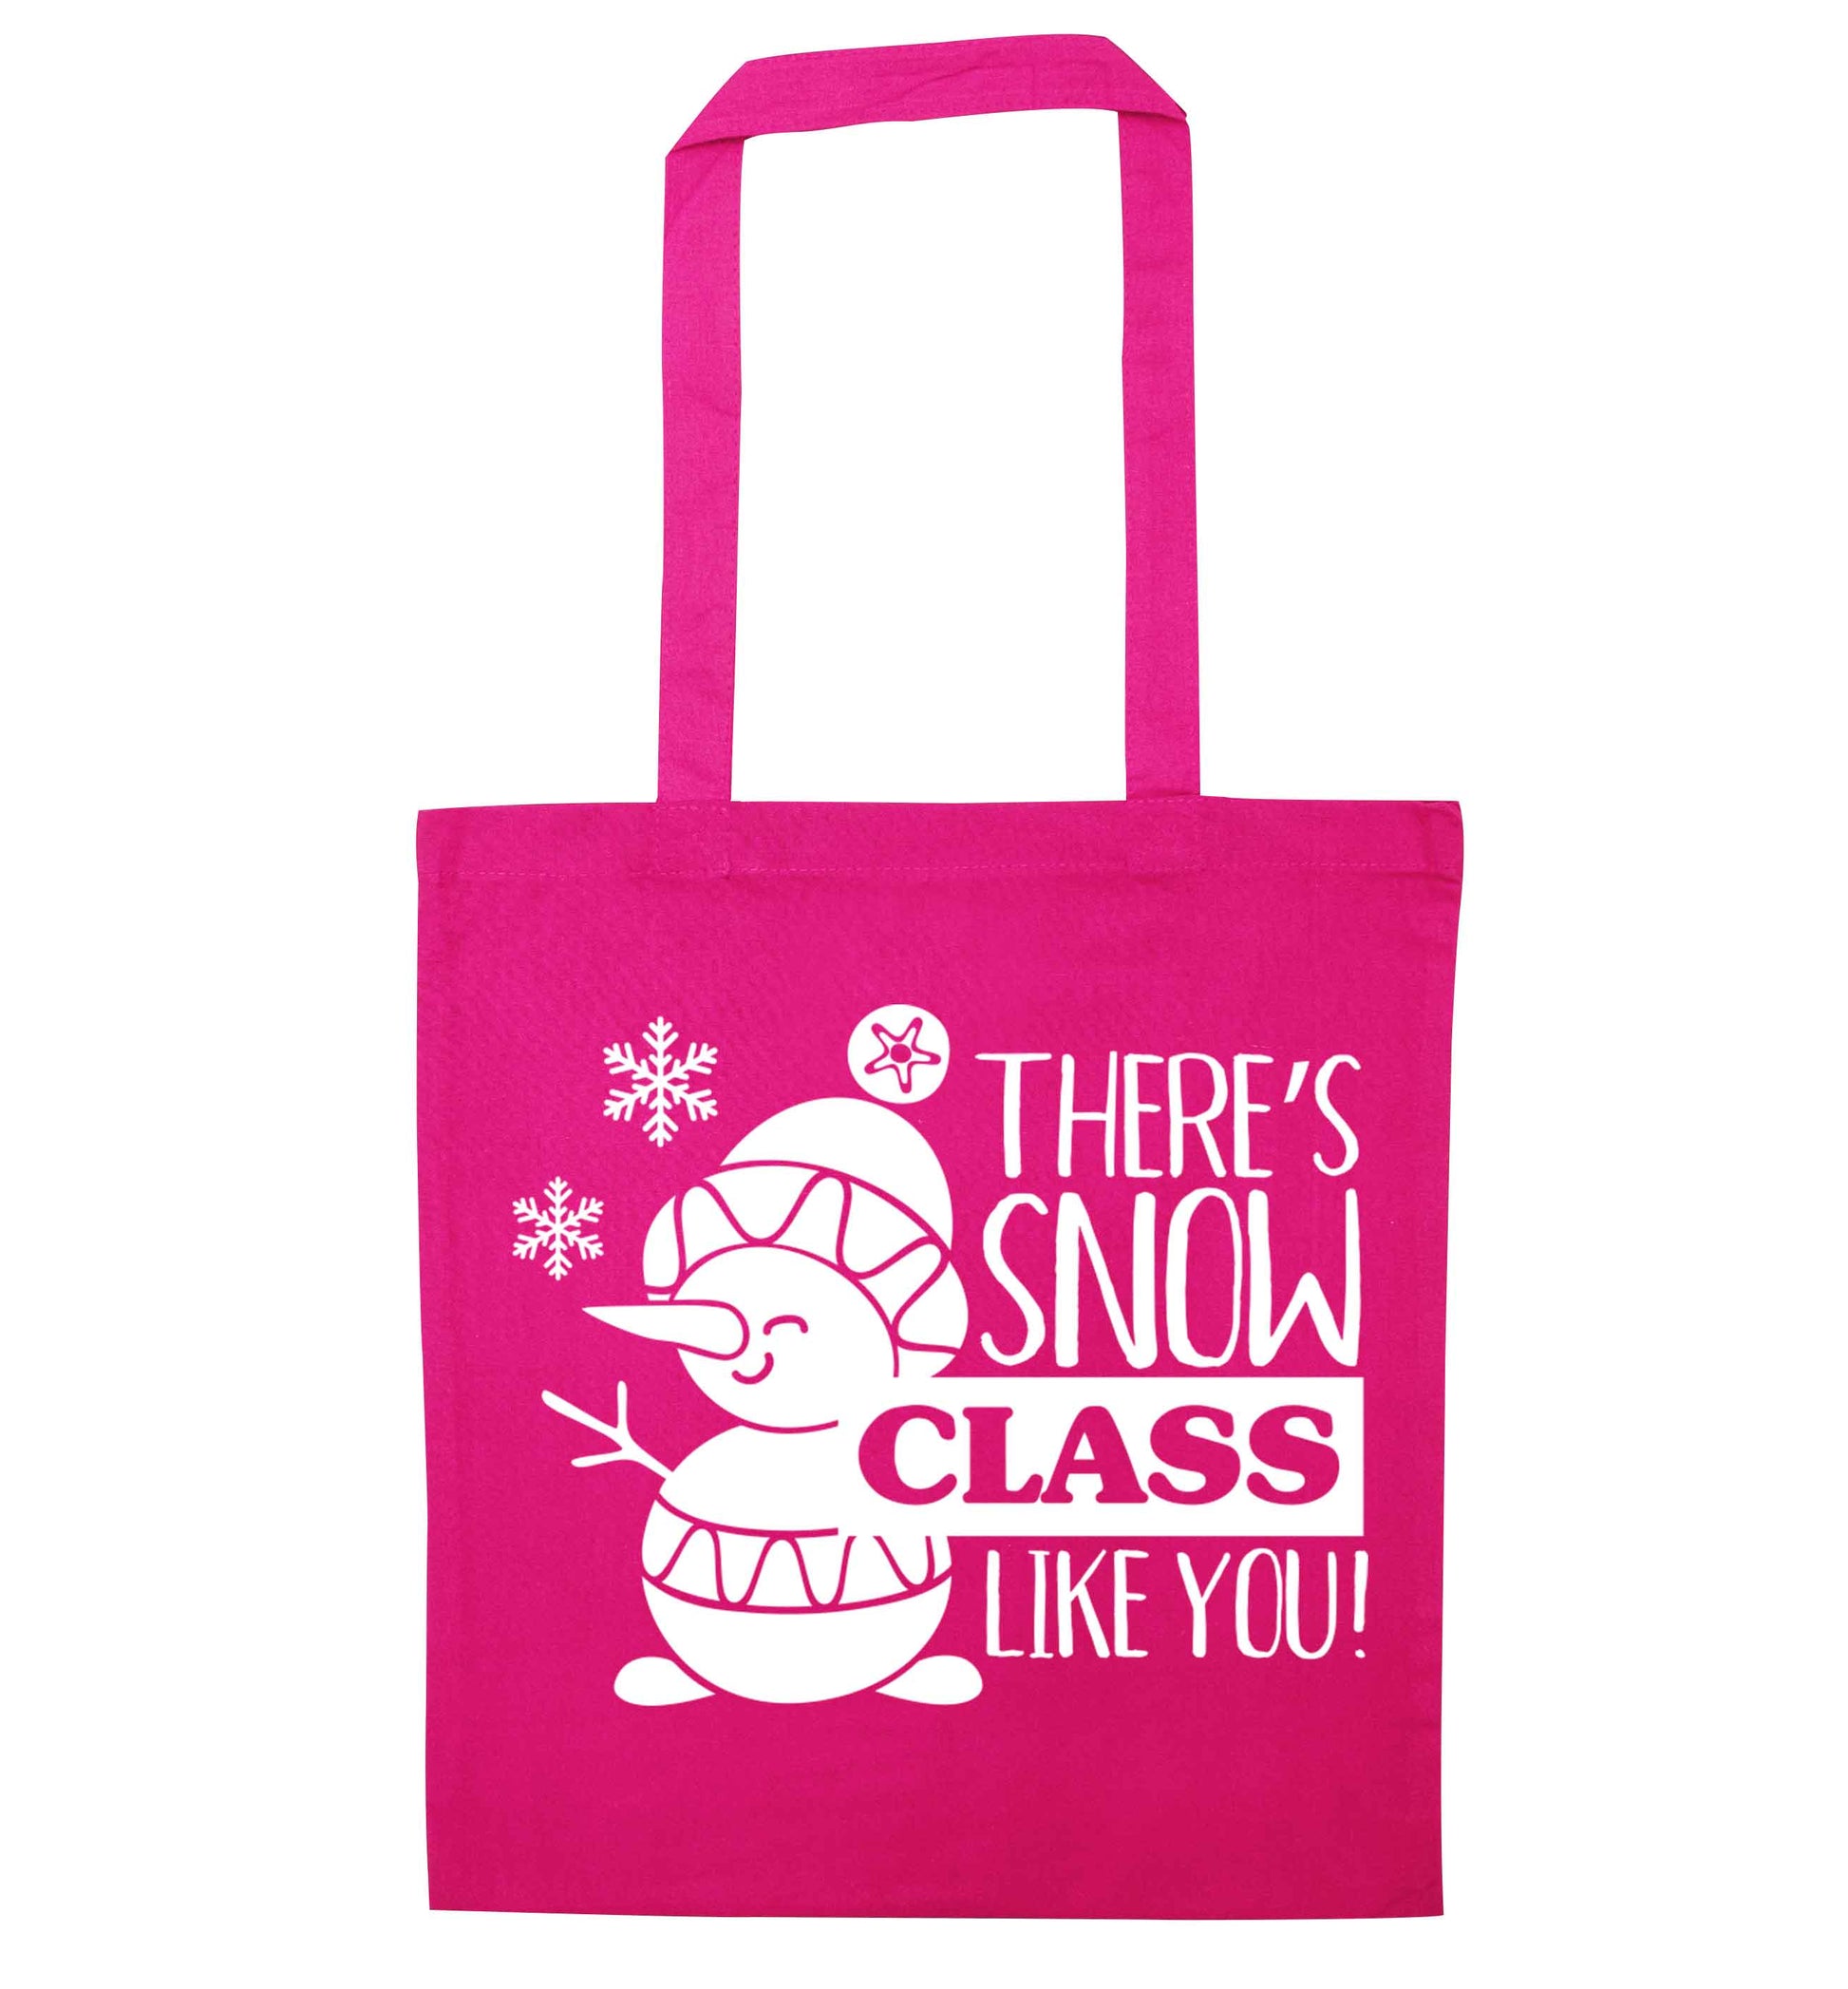 There's snow class like you pink tote bag